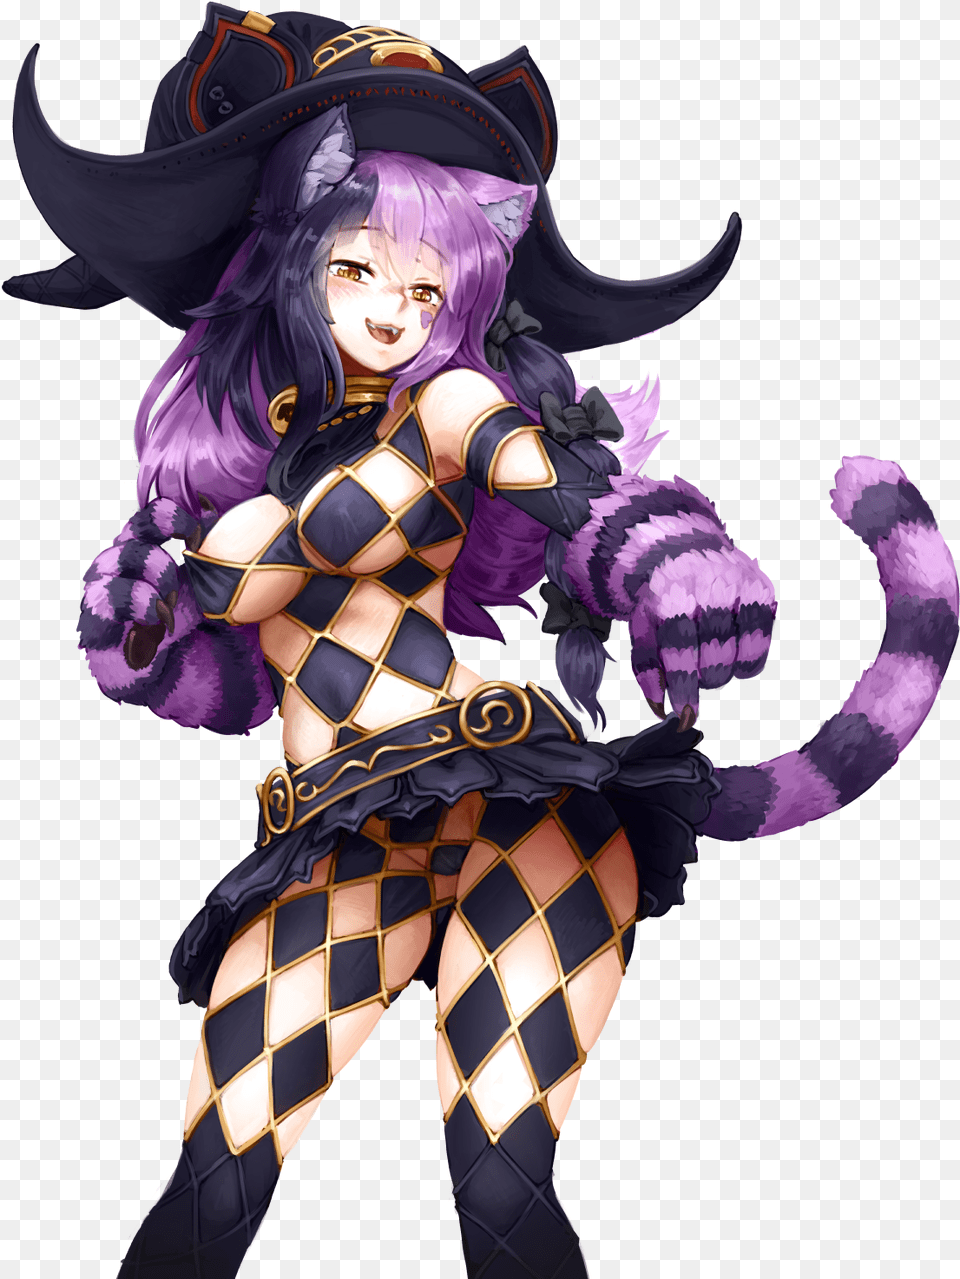 Anime Cheshire Cat Girl Download Cheshire Cat Anime Girl, Book, Clothing, Comics, Costume Free Png